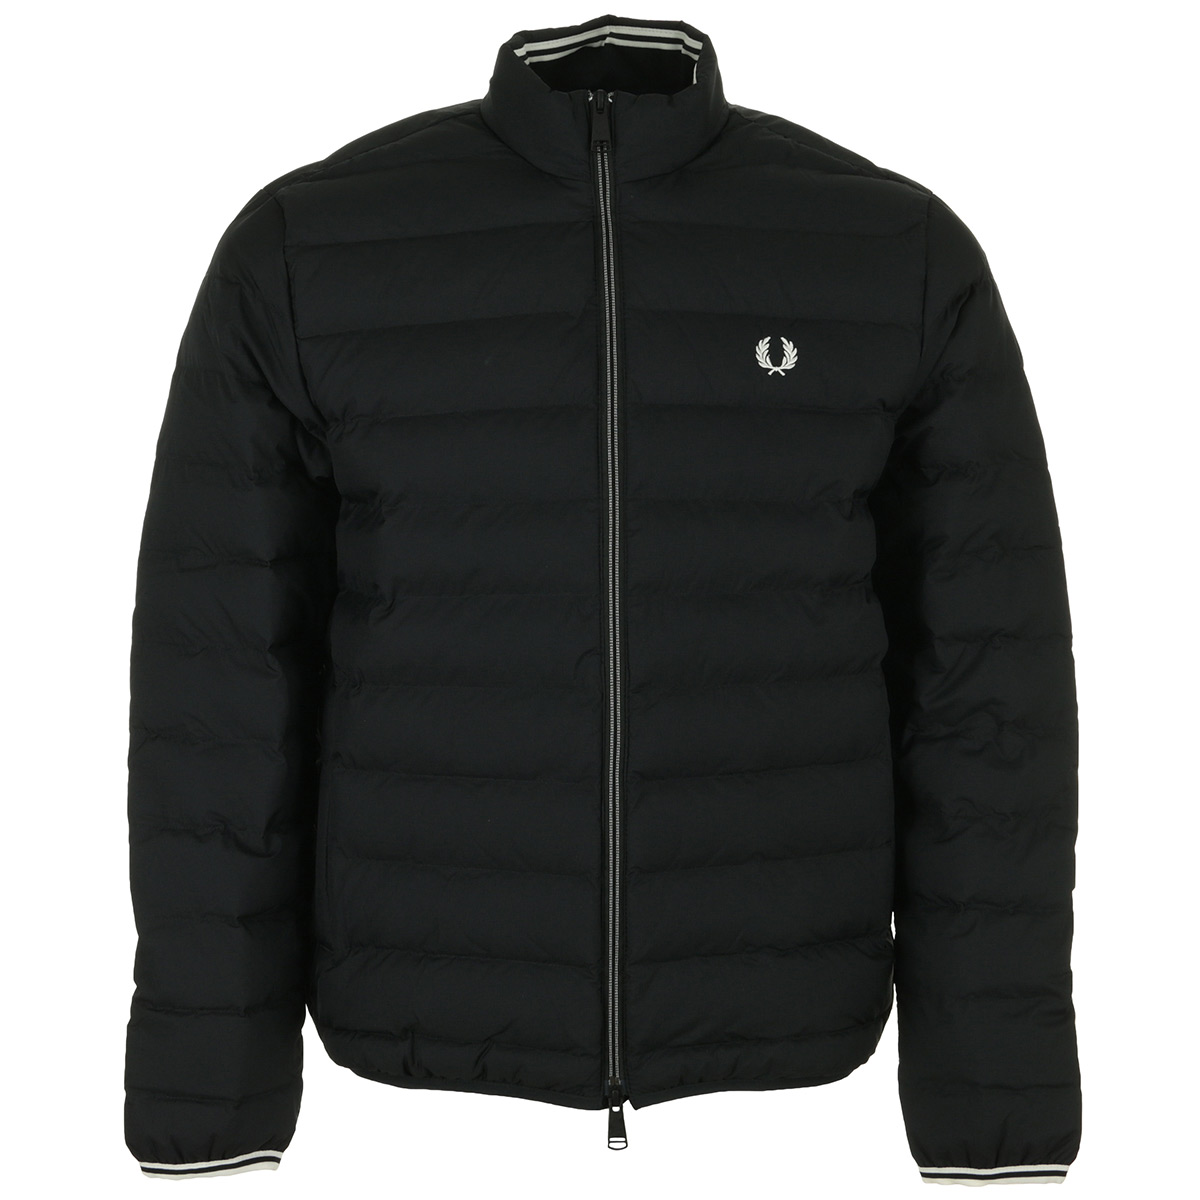 Fred Perry Insulated Jacket